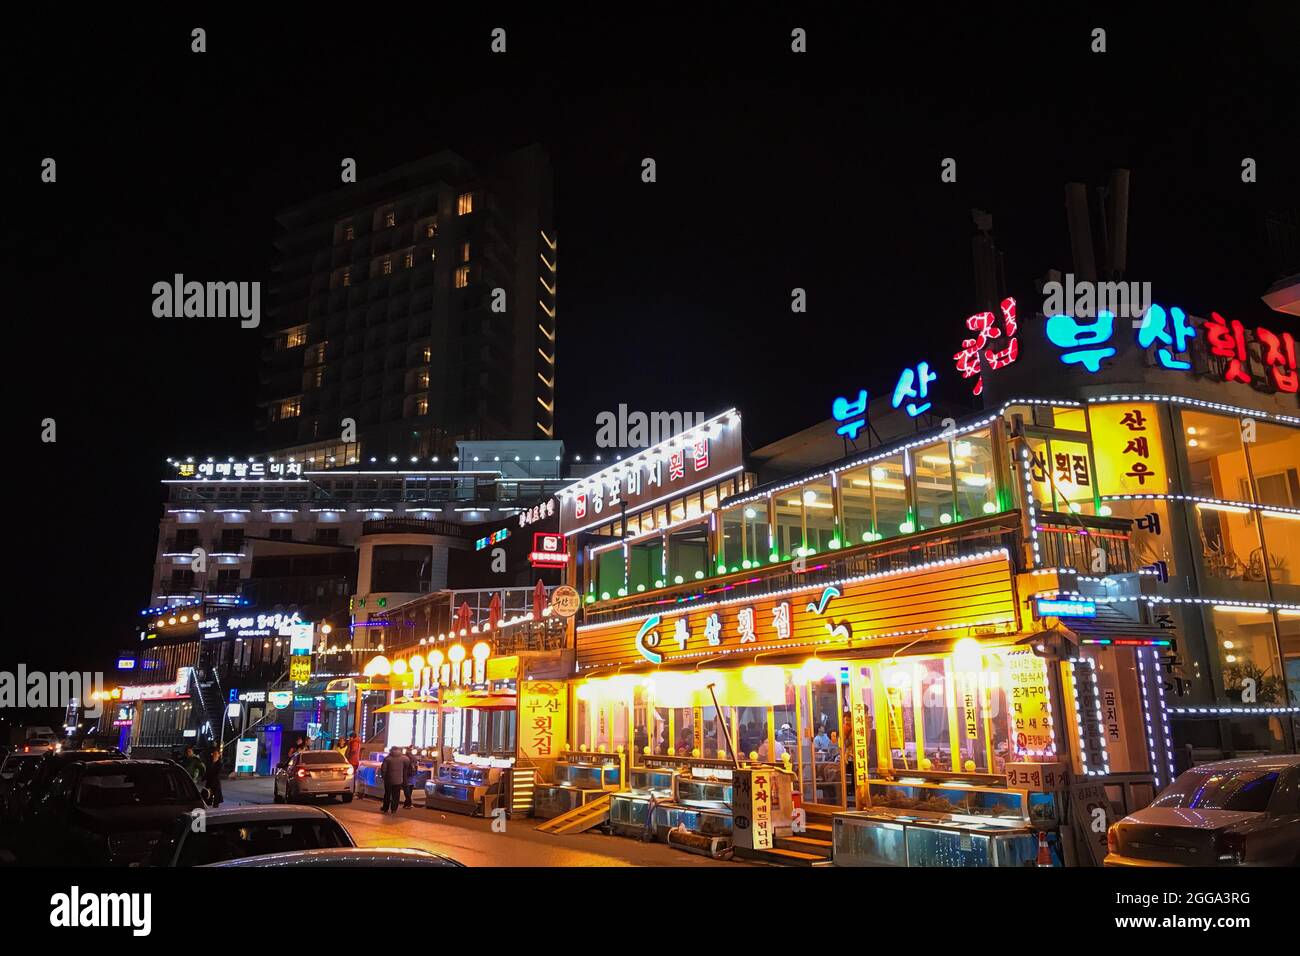 Gangneung, South Korea - February 16, 2018: Illuminated street with restaurants next to Gyeongpo beach in Gangmun-dong, at night Stock Photo